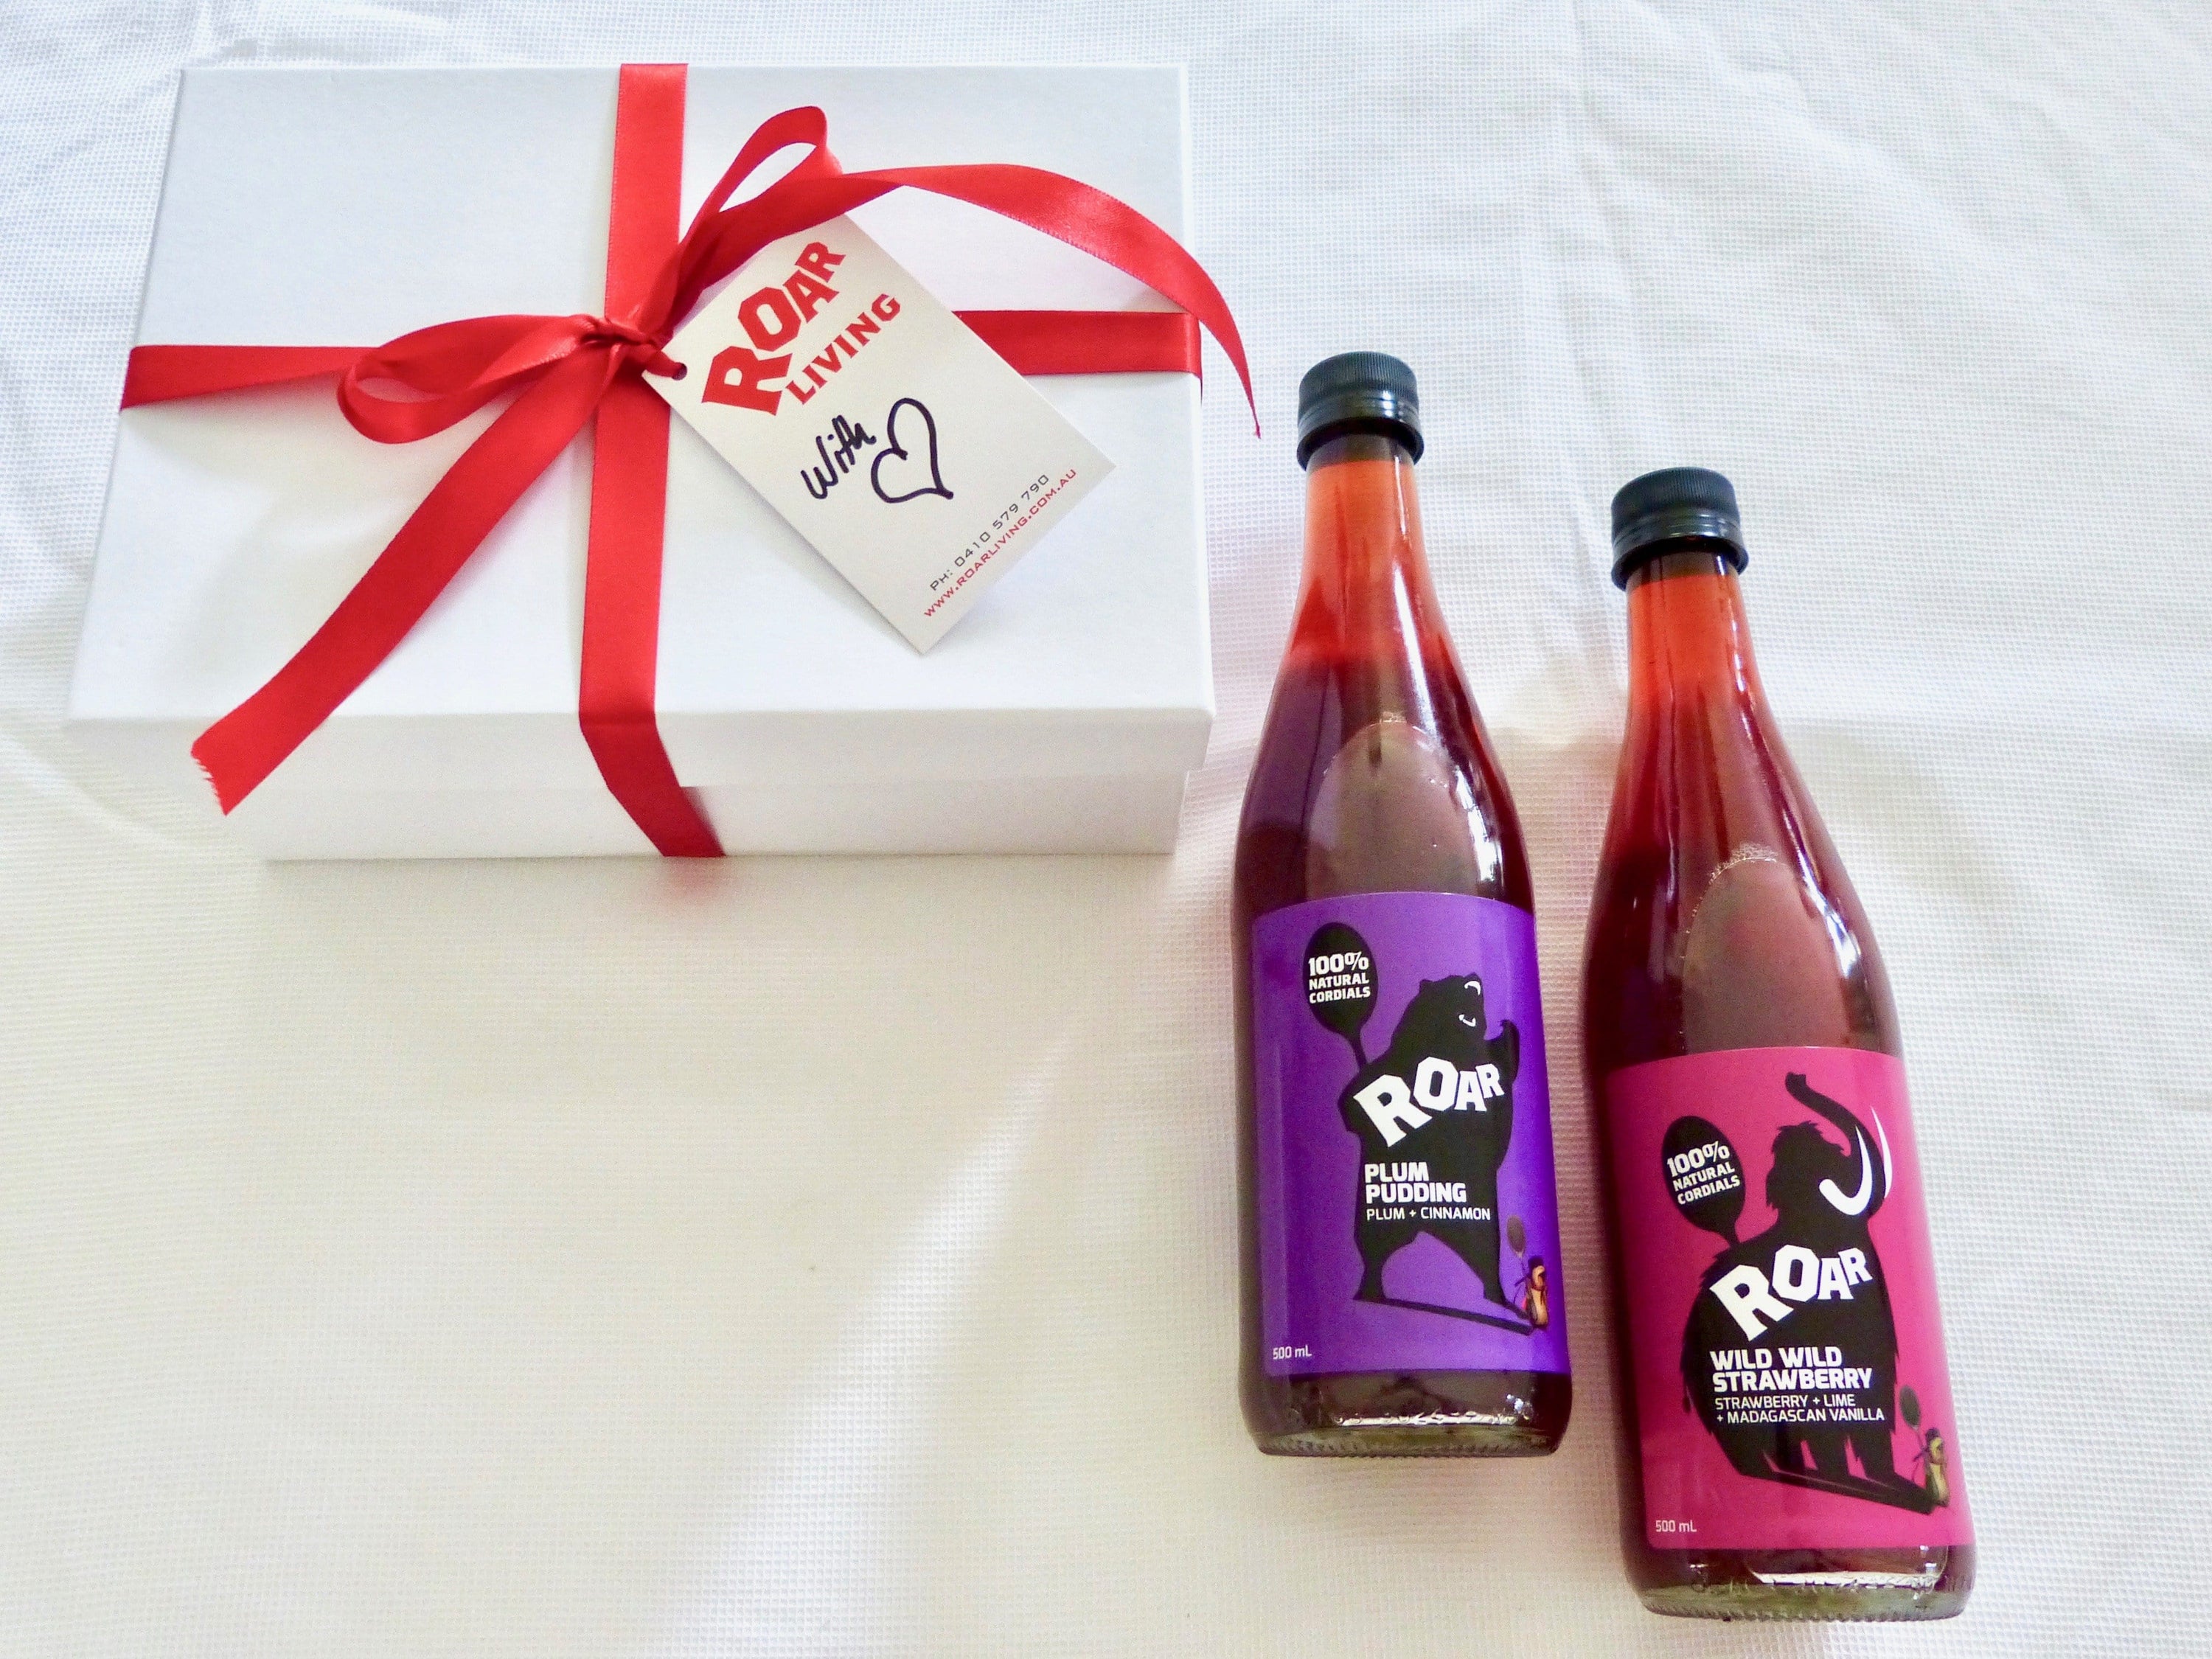 Strawberry cordial. Fruity cordial. Natural cordial. Strawberries. Cinnamon and plum drink. Gift idea. Australian hampers and gifts. Boutique drink. 